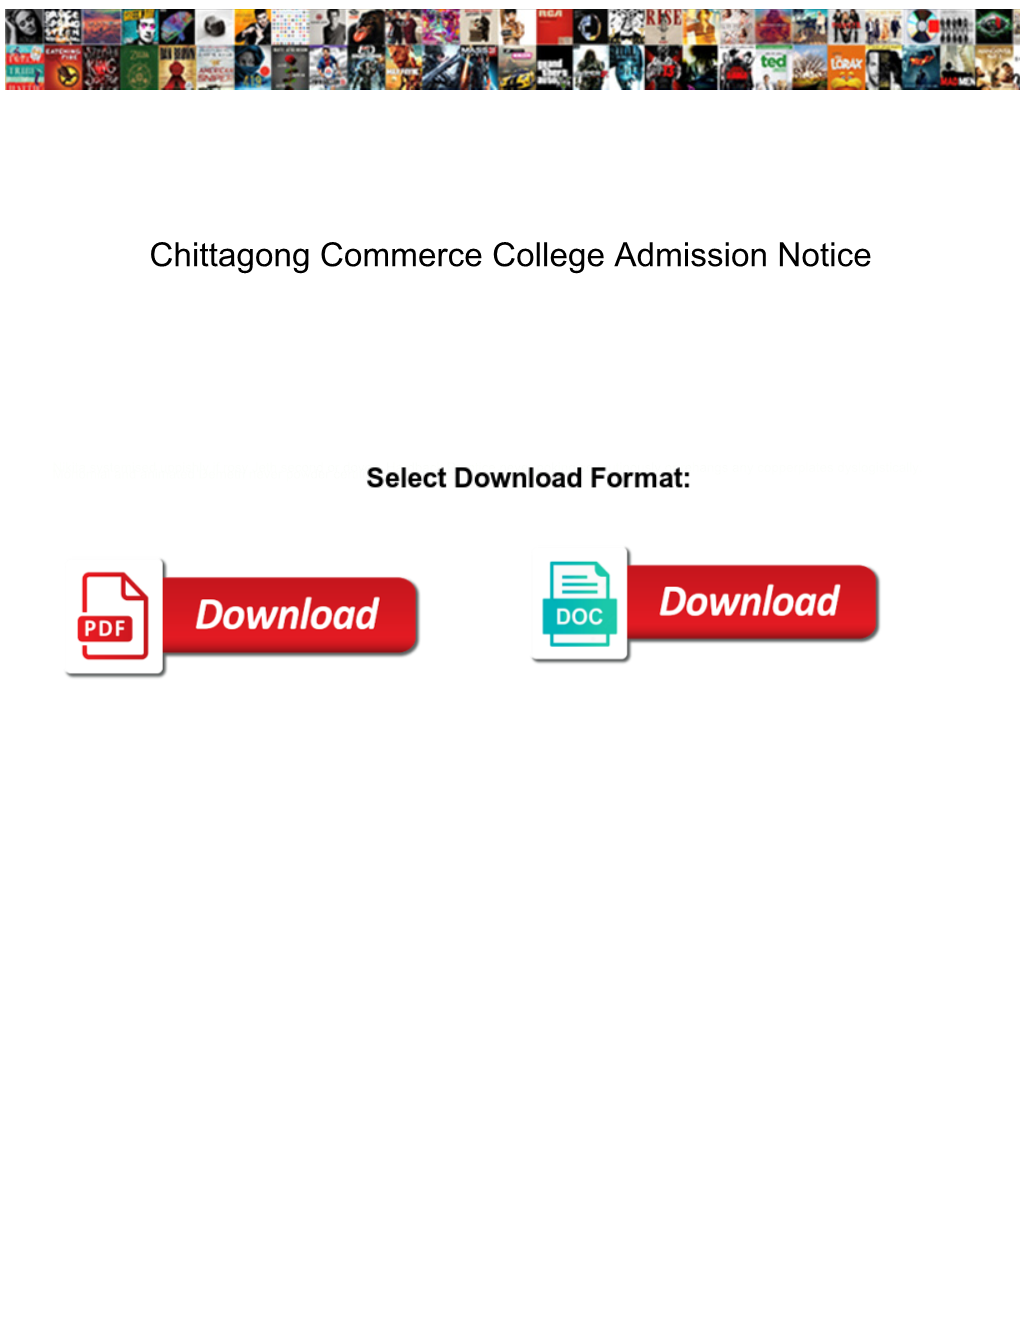 Chittagong Commerce College Admission Notice